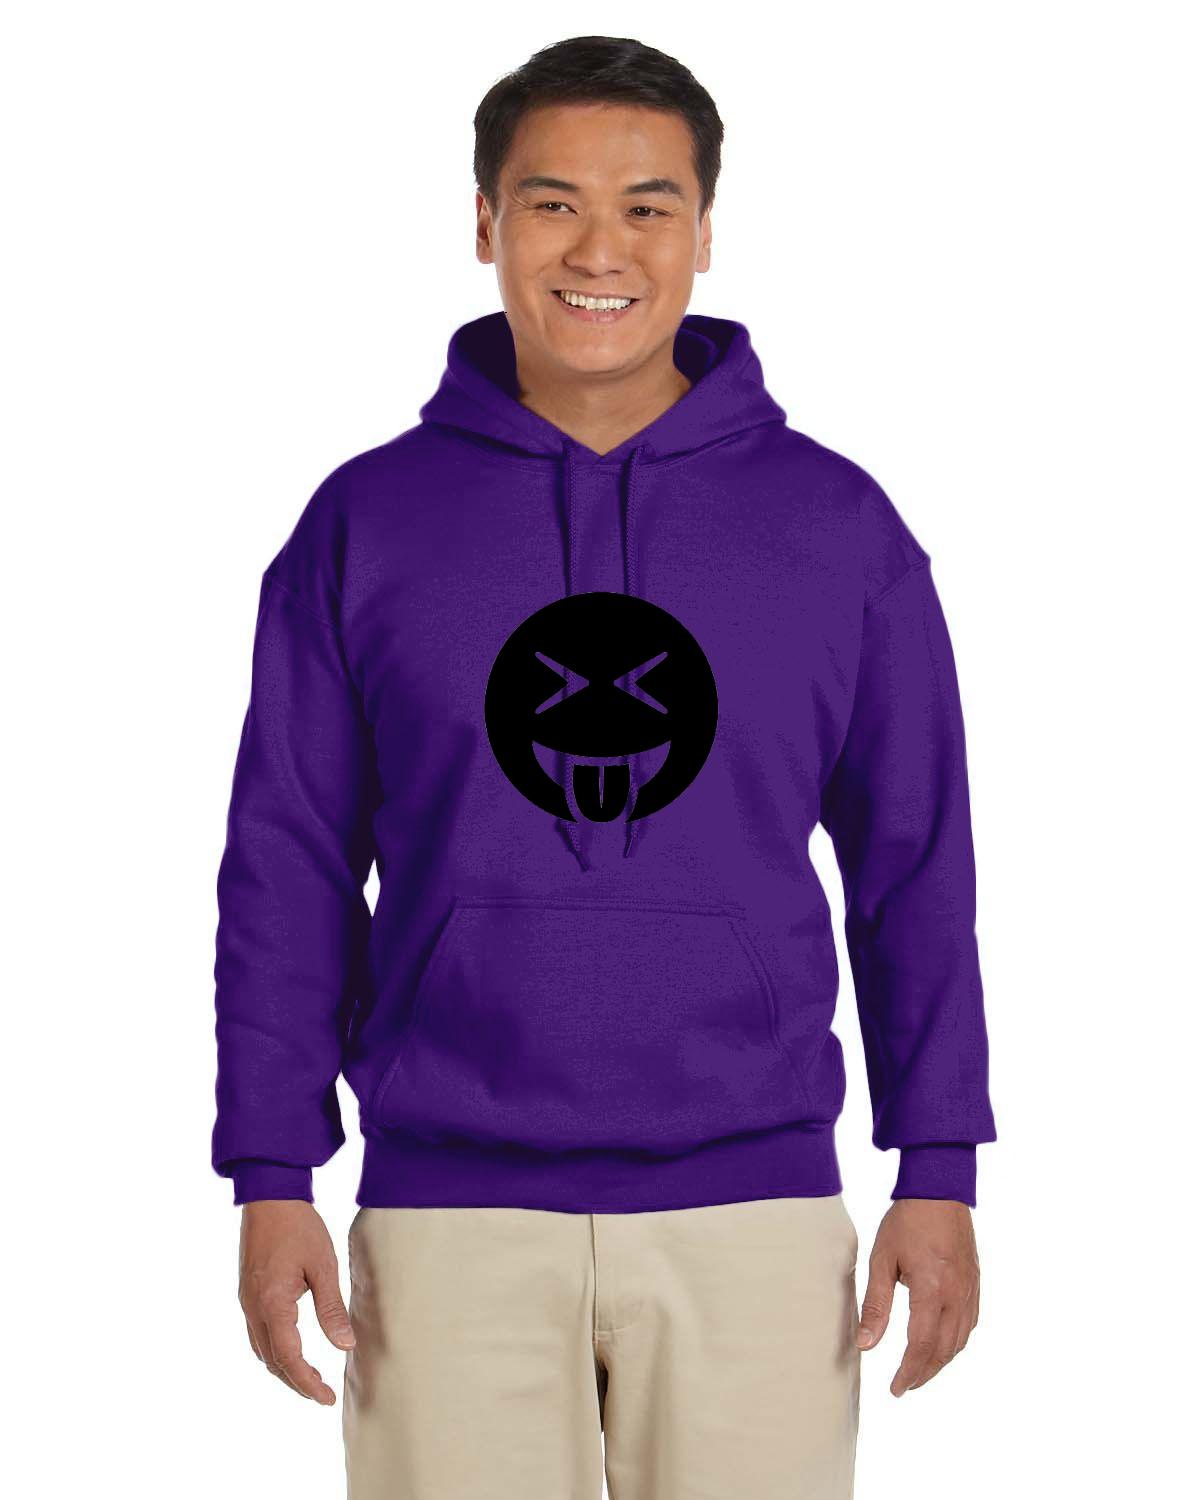 Adult Tongue Out Laughing 50/50 Hoodie